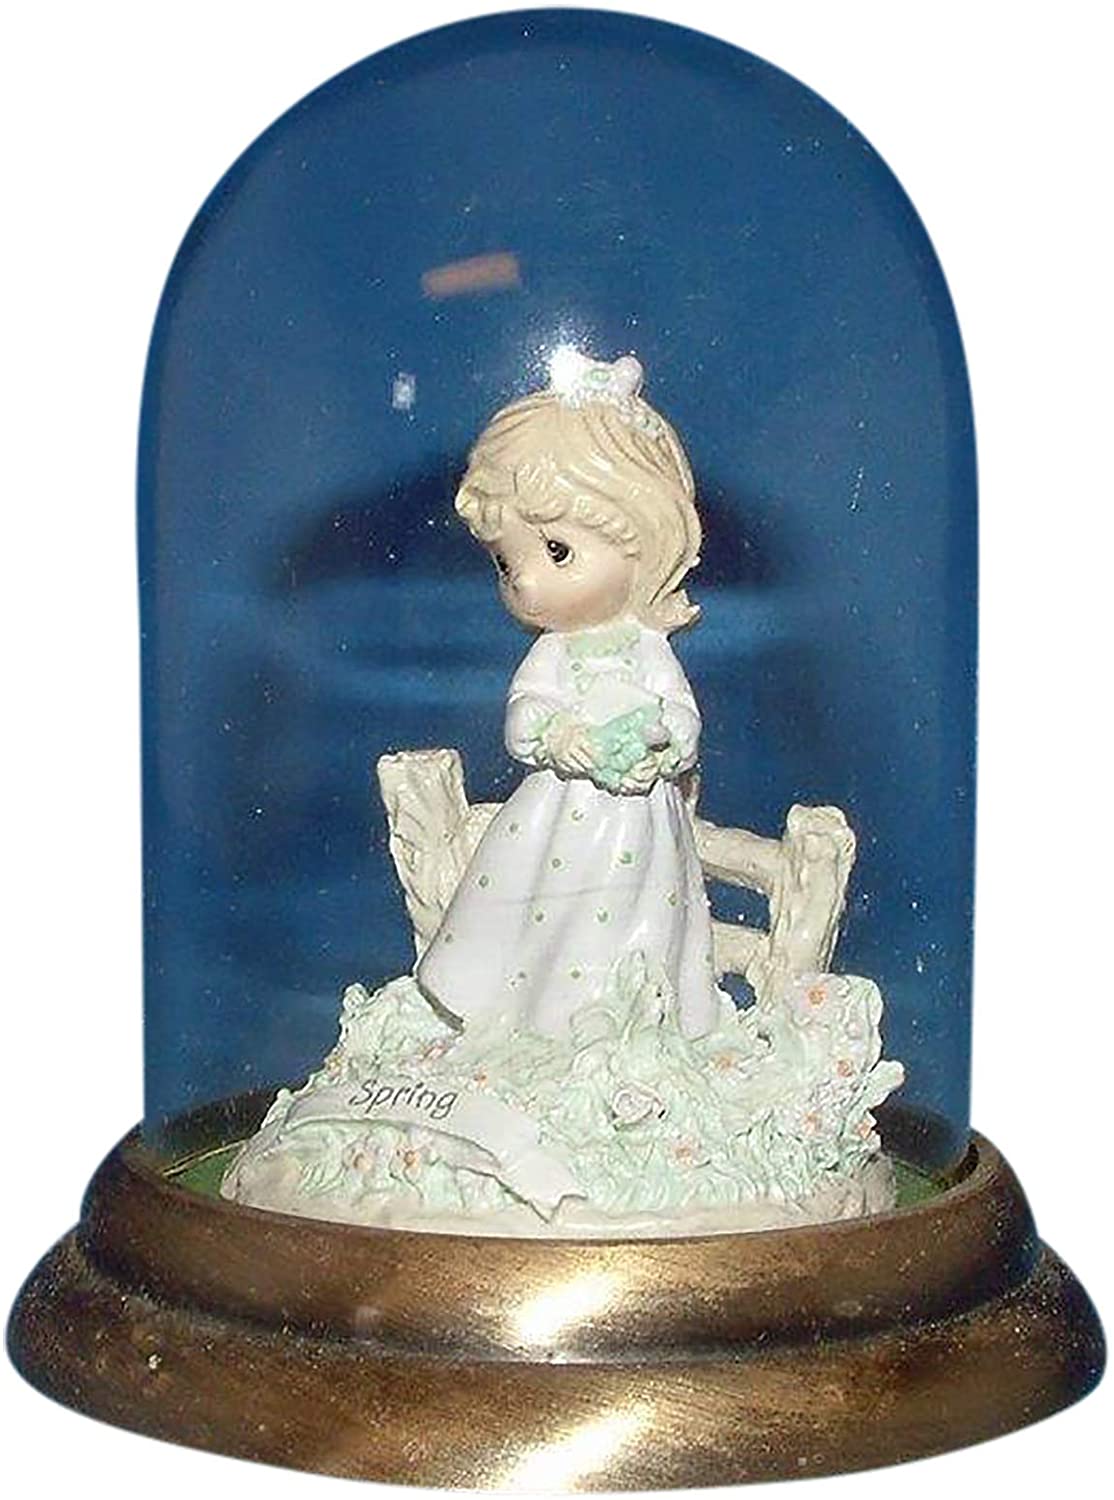 Precious Moments "The Voice of Spring" Miniature Pewter Figurine